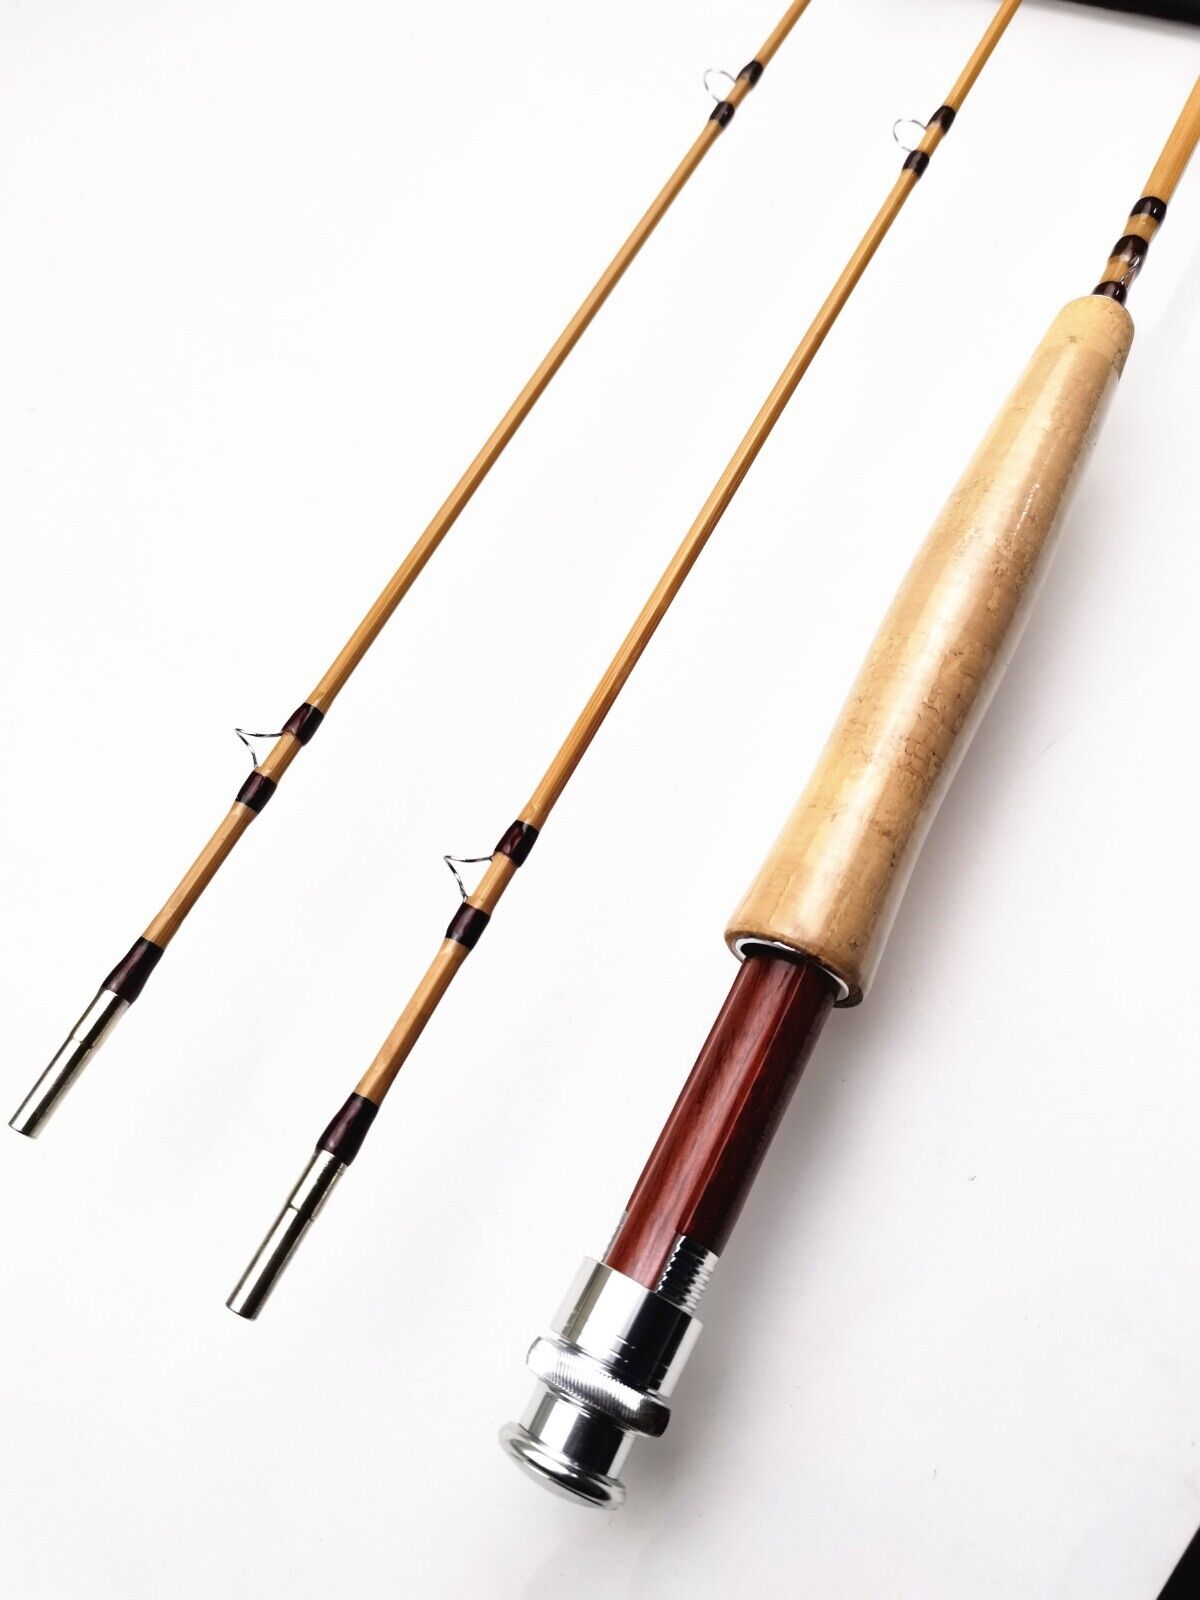 ZHUSRODS Bamboo Fly Rods 6' 0 2wt/2 section / 2 Tips/Fishing Rods